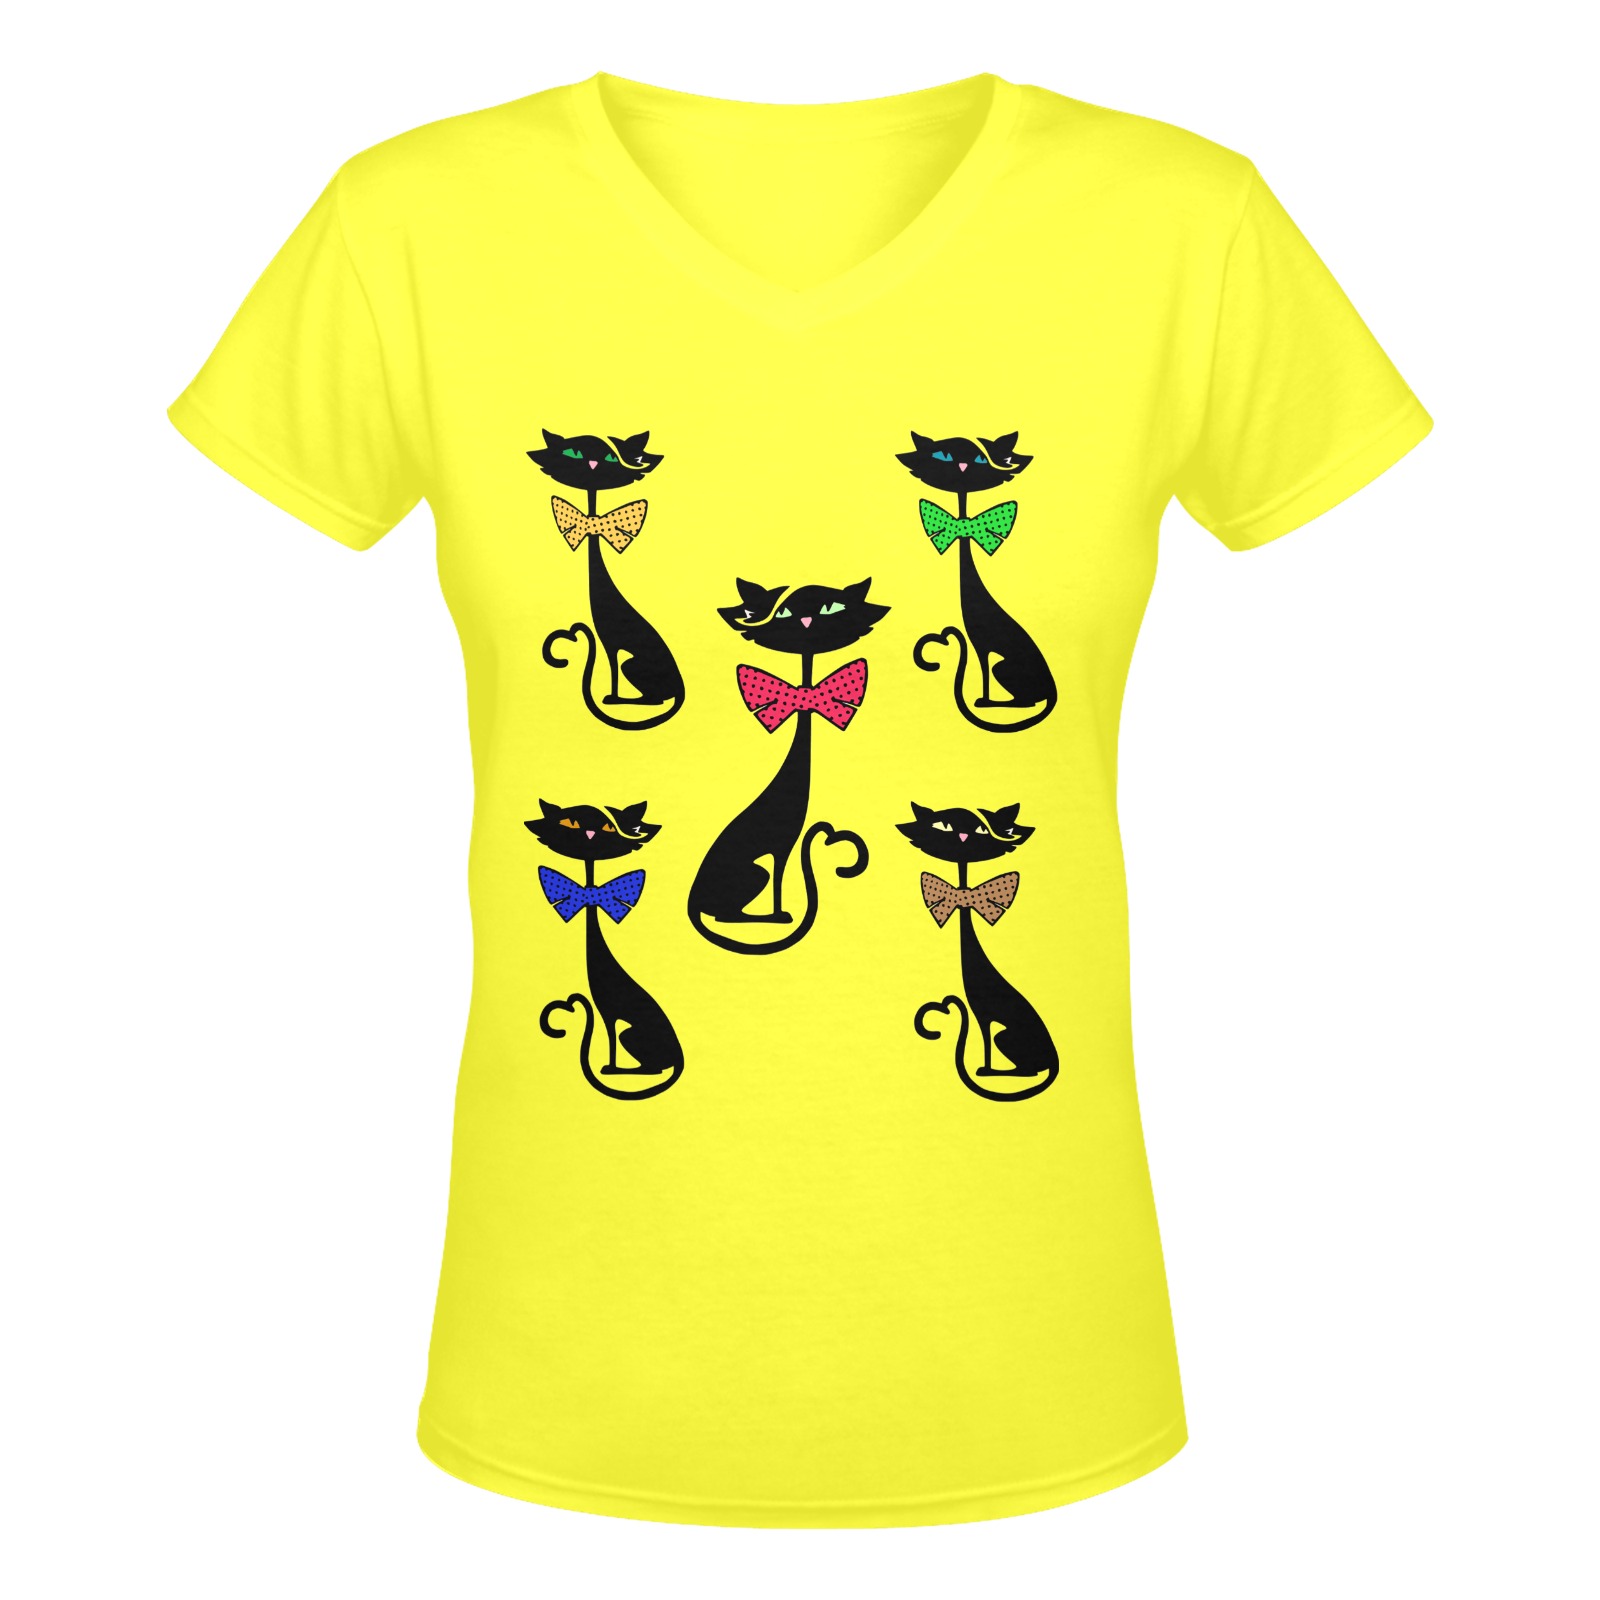 Black Cat with Bow Ties - Yellow Women's Deep V-neck T-shirt (Model T19)